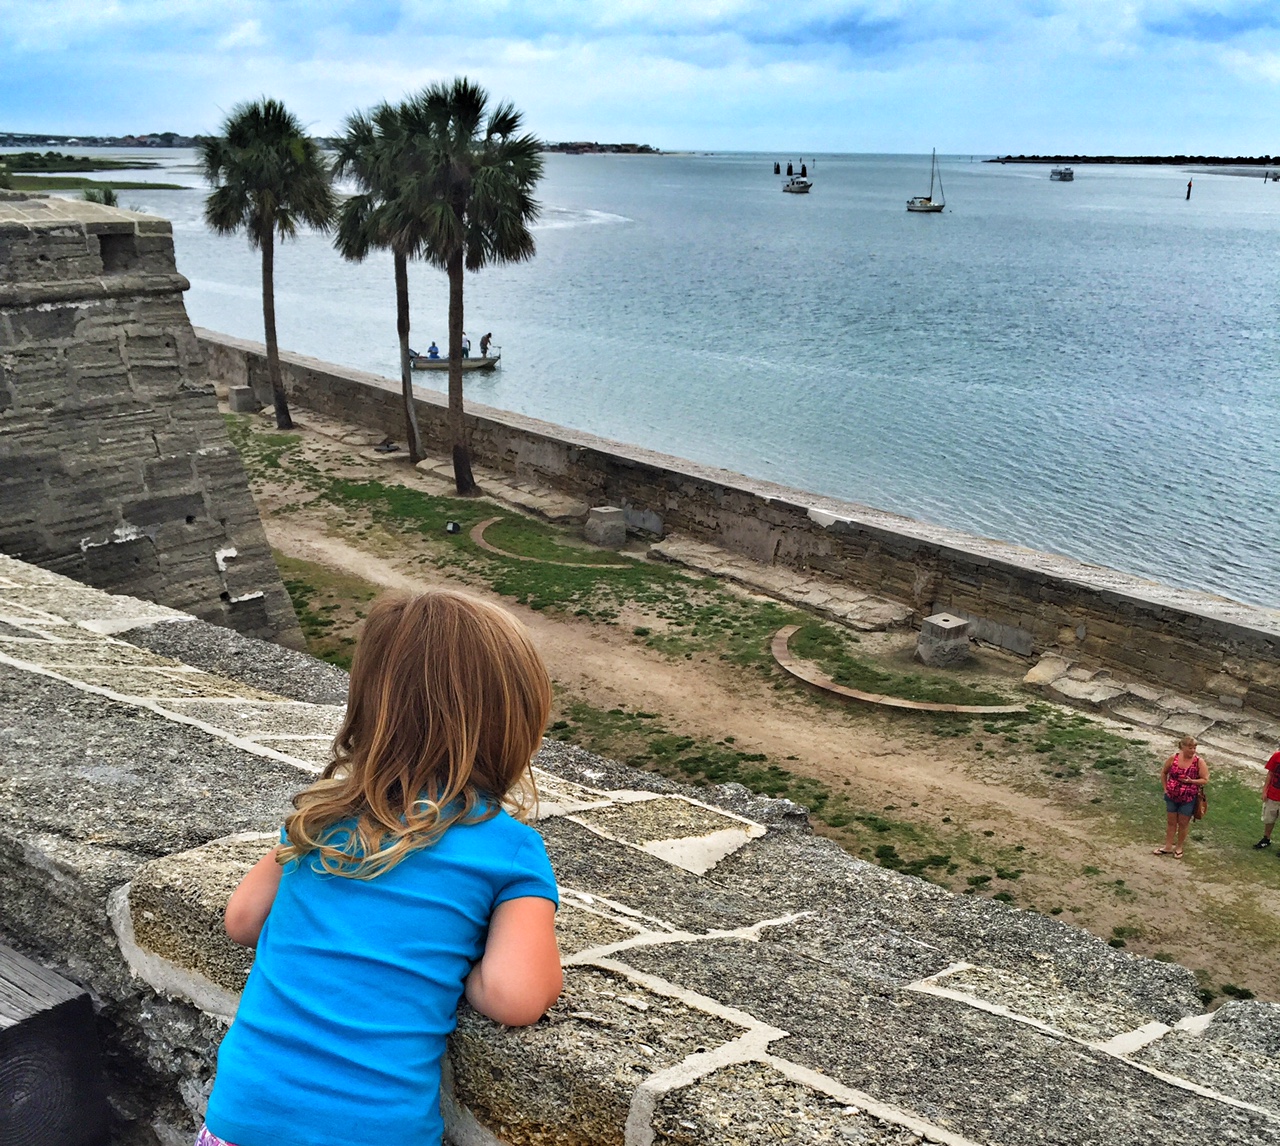 St Augustine Florida | Things to do with kids in St Augustine | Travel with kids | Family Travel Blog | Mandy Carter florida Travel writer | Acupful.com travel blog | Florida Travel | travel florida with kids | #SeeAllofFlorida | #LoveFl